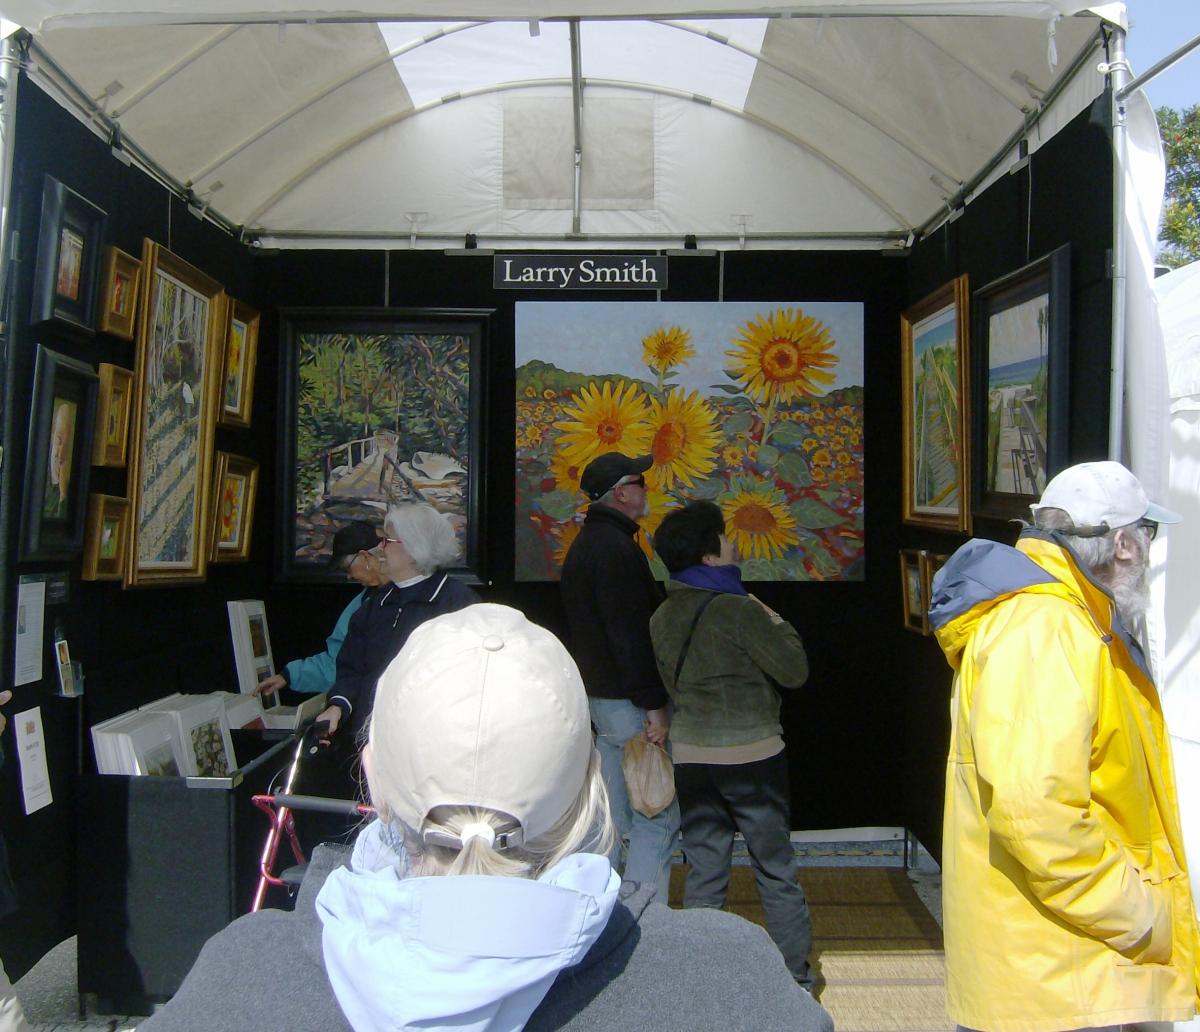 Artist observing visitors in a booth